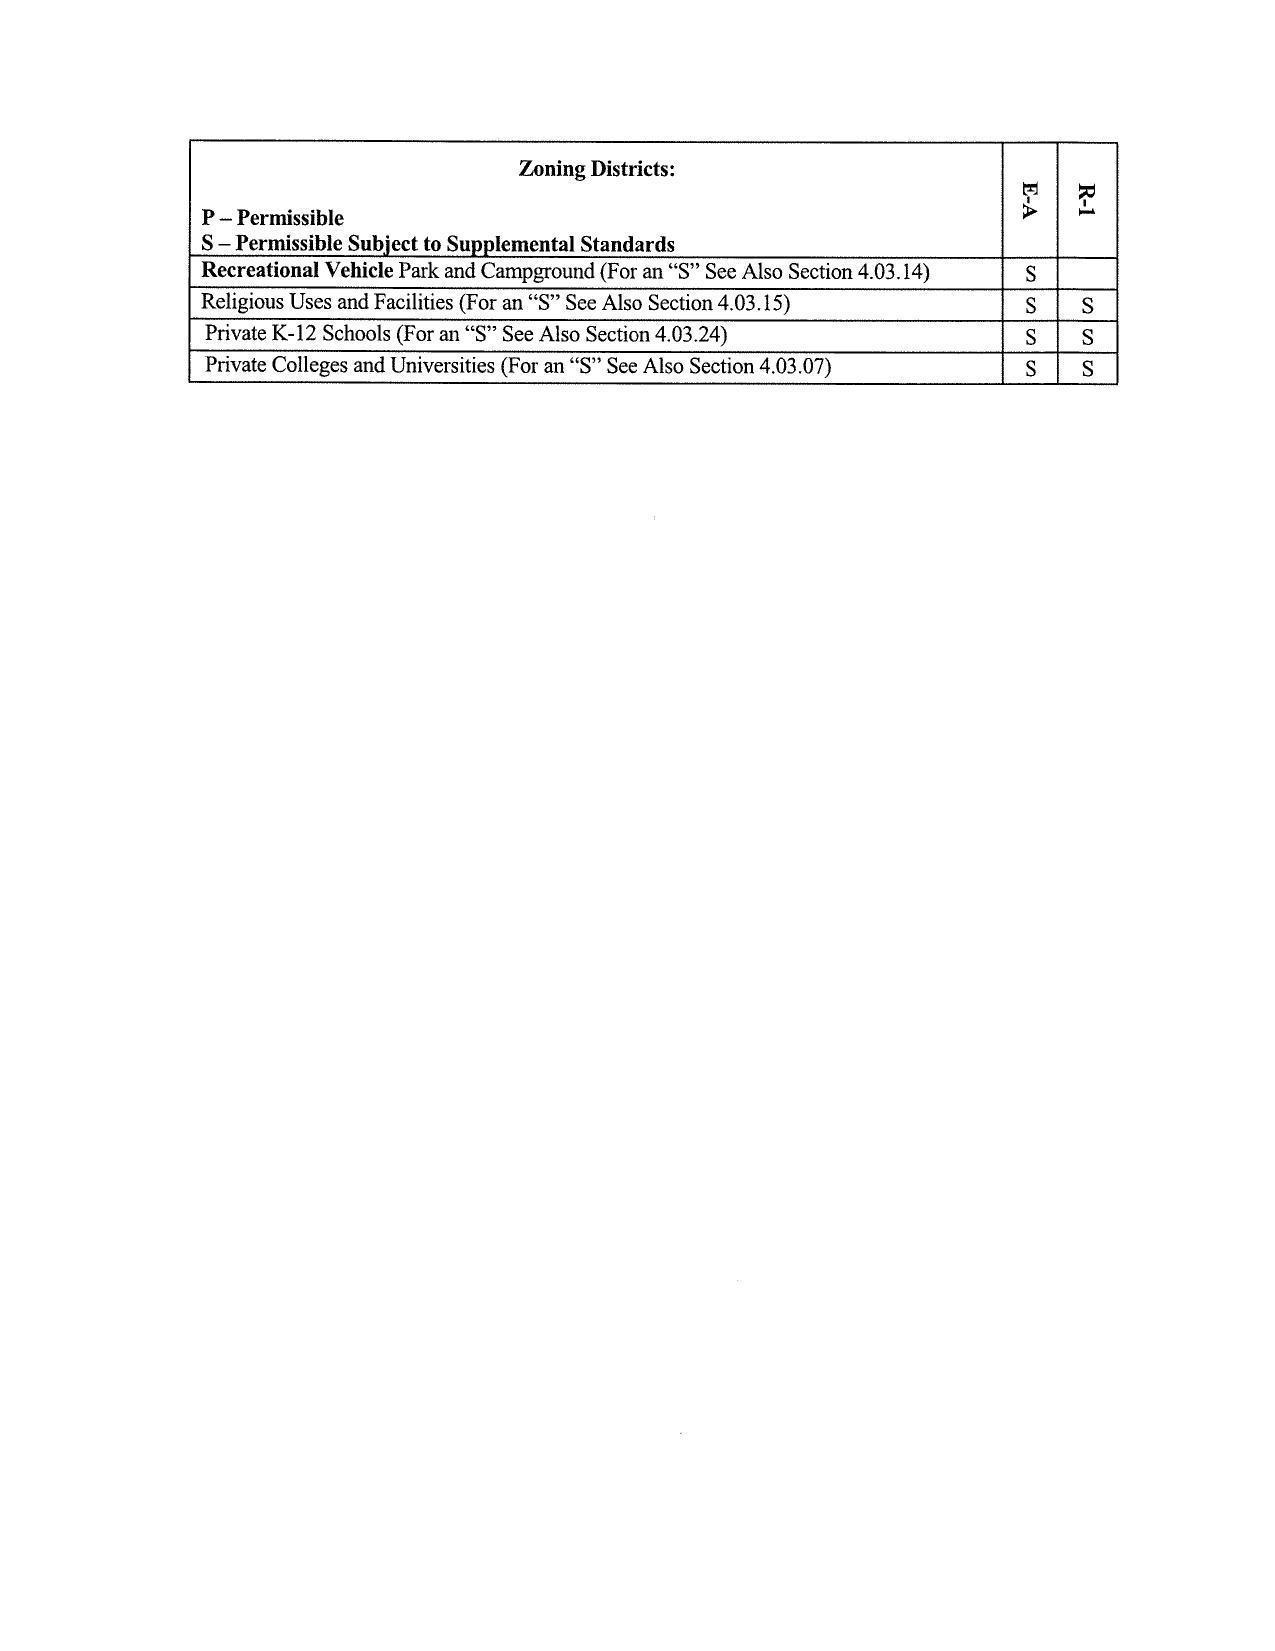 Private K-12 Schools (For an “S” See Also Section 4.03.24) $ | s